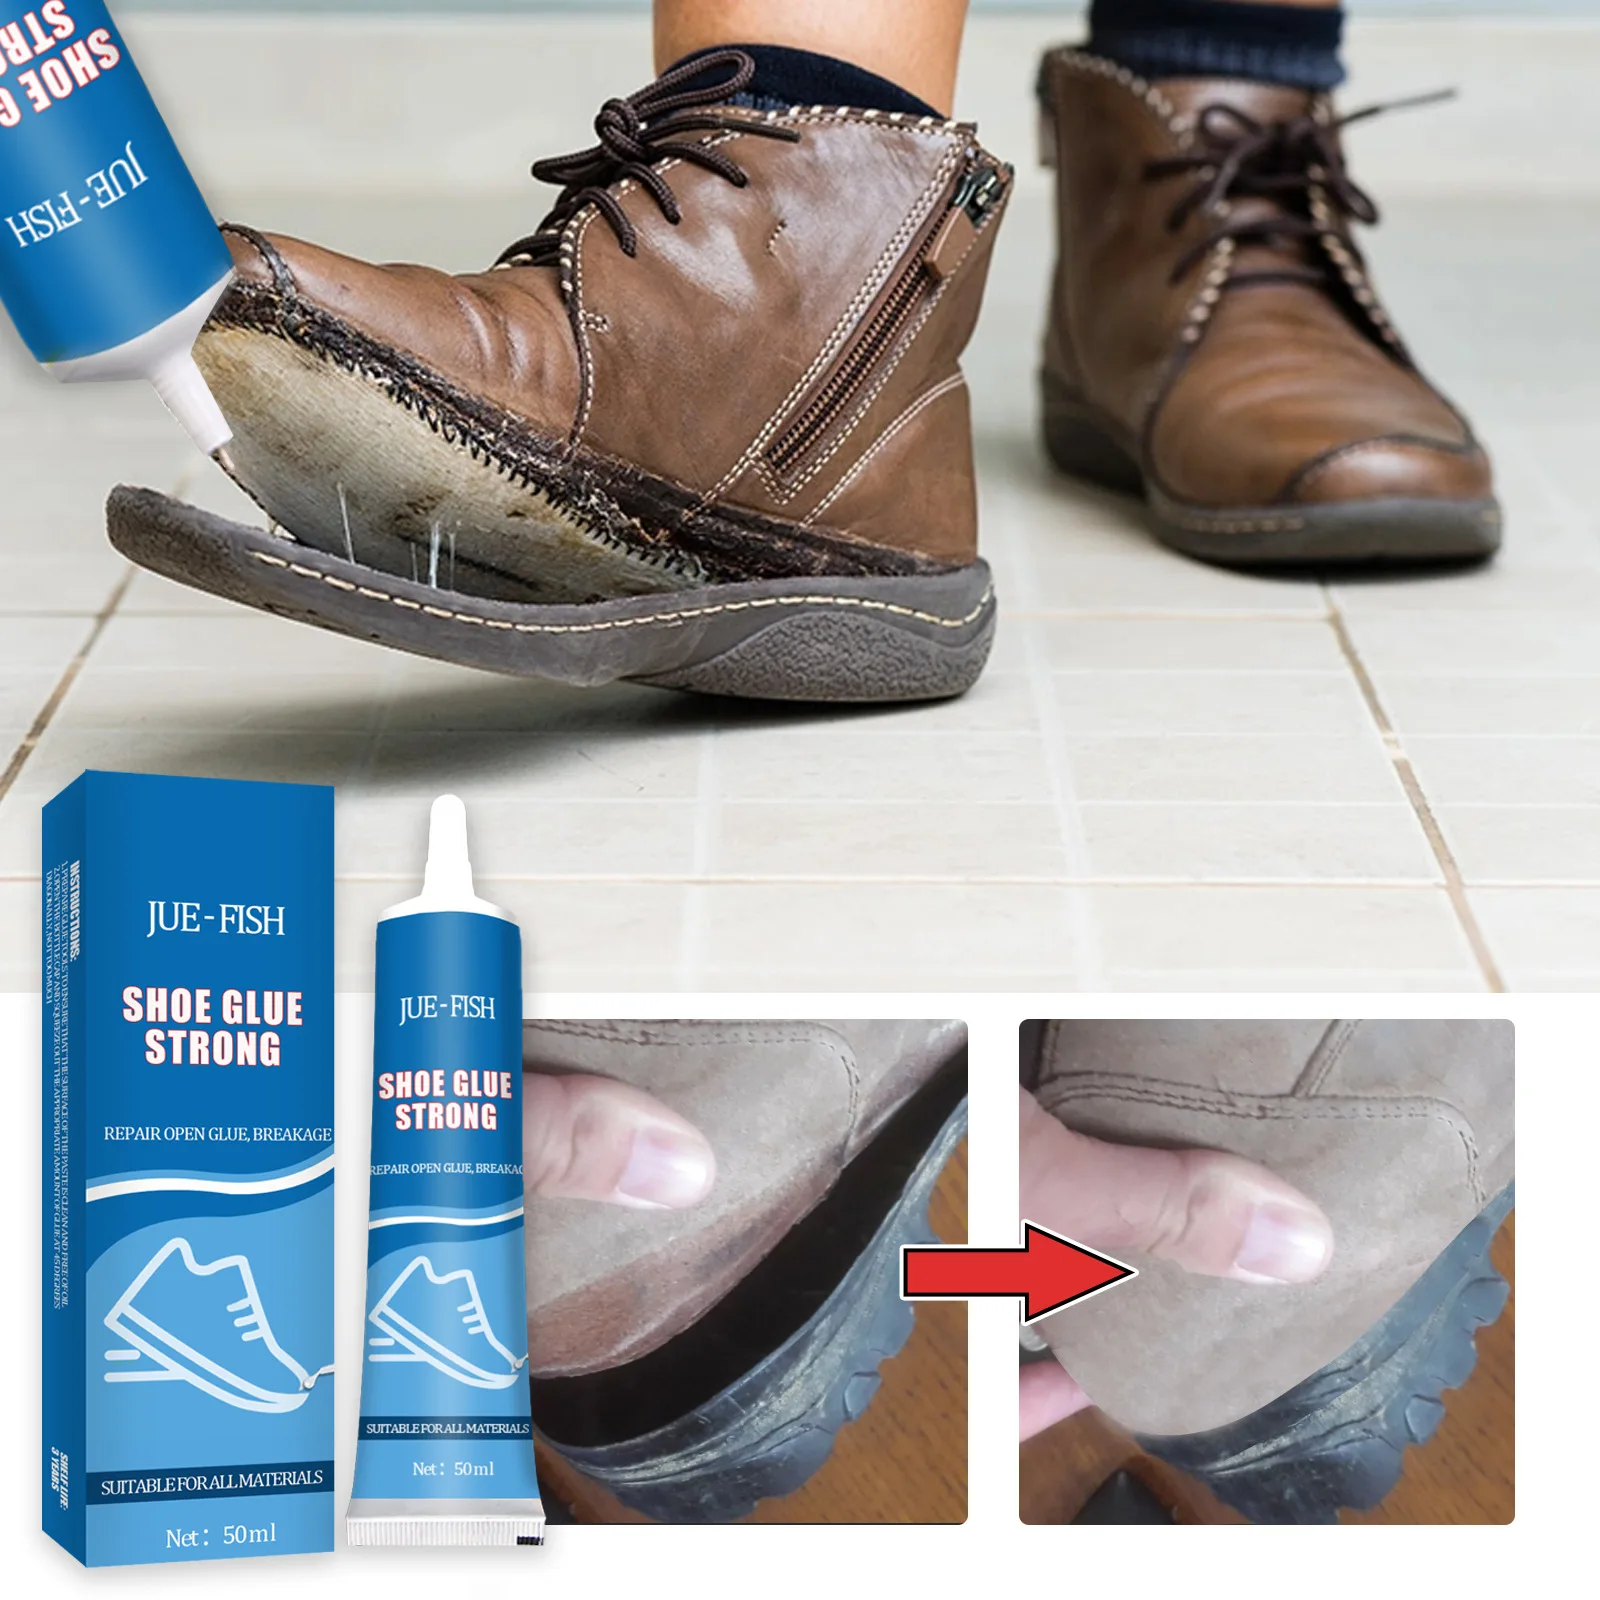 Strong Shoe Glue Waterproof Universal Leather Sneakers Worn Shoes Boot Sole Bond Adhesive Shoemaker Fix Mending Liquid Tool 50ml